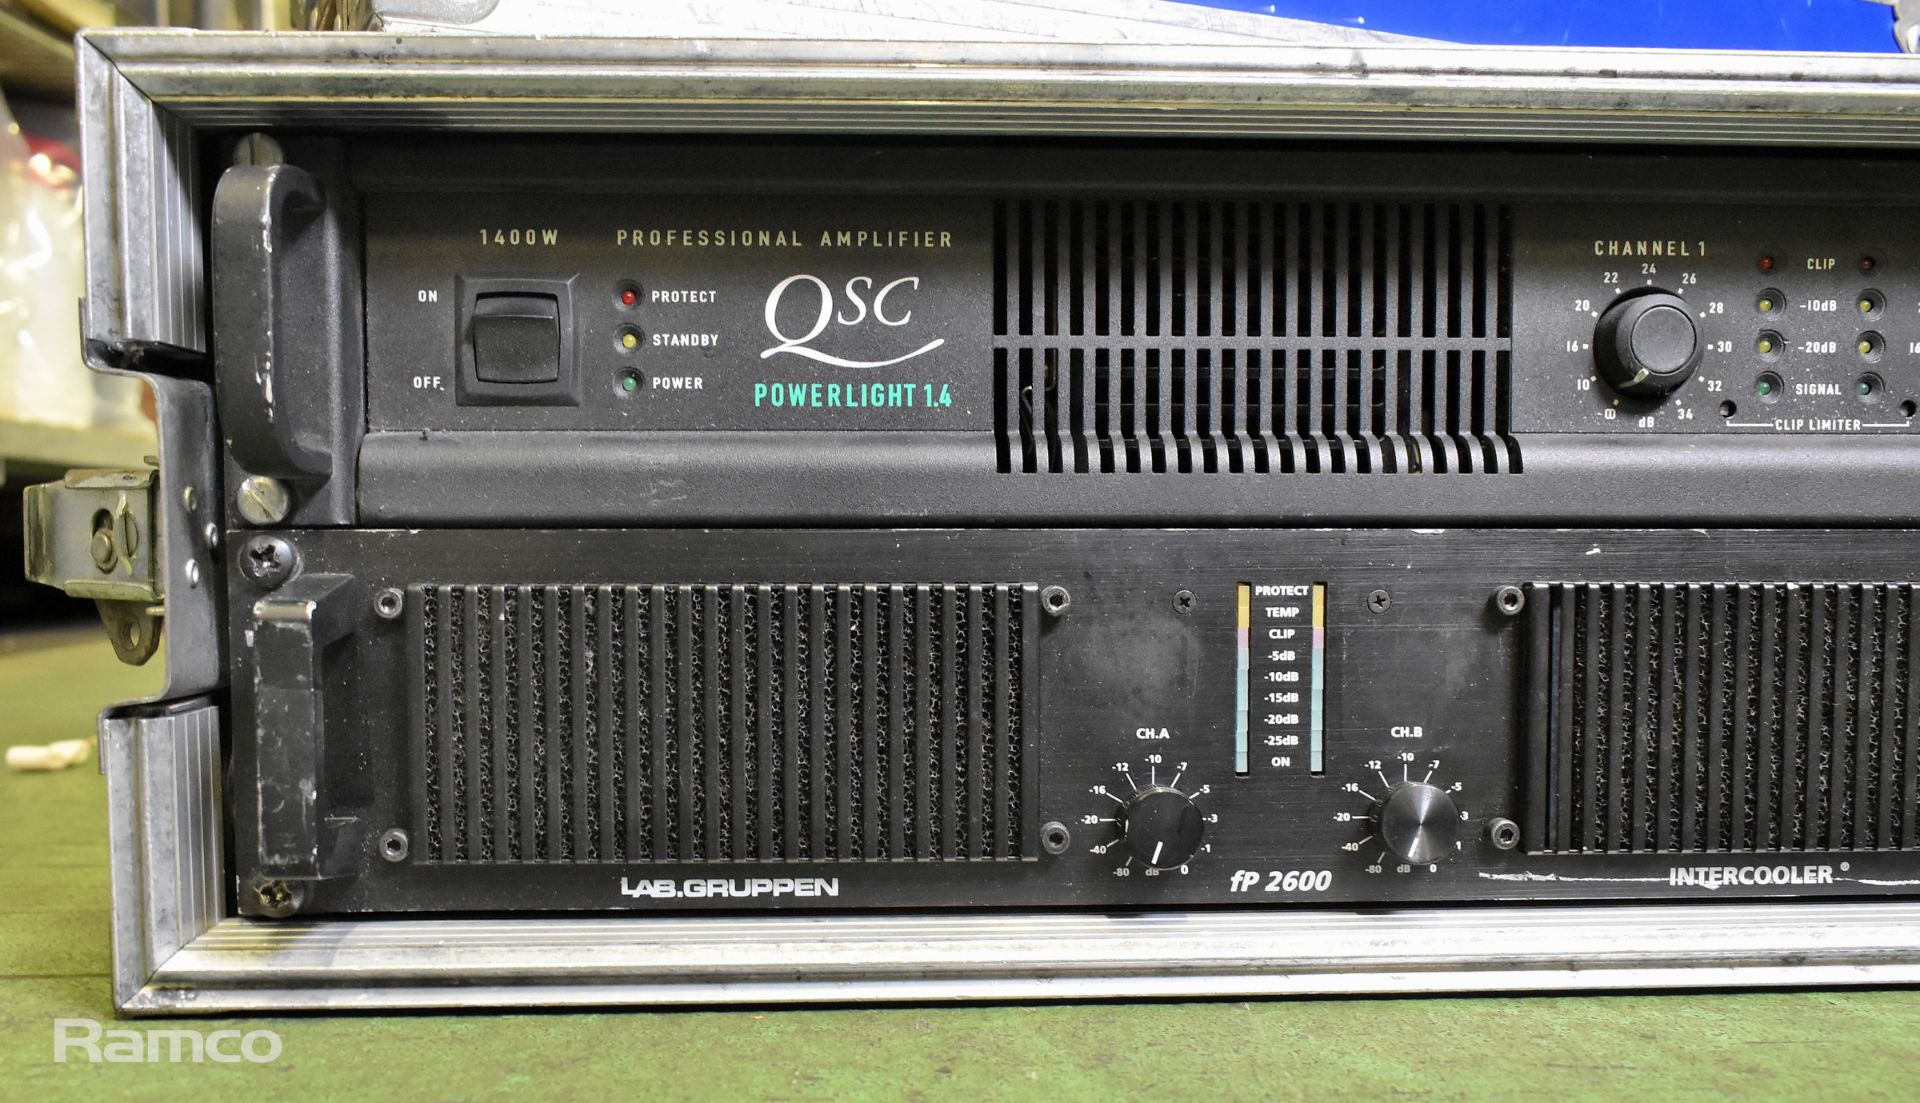 Lab Gruppen FP2600 amplifier and QSC Powerlight 1.4 amplifier in a flightcase - Image 2 of 7